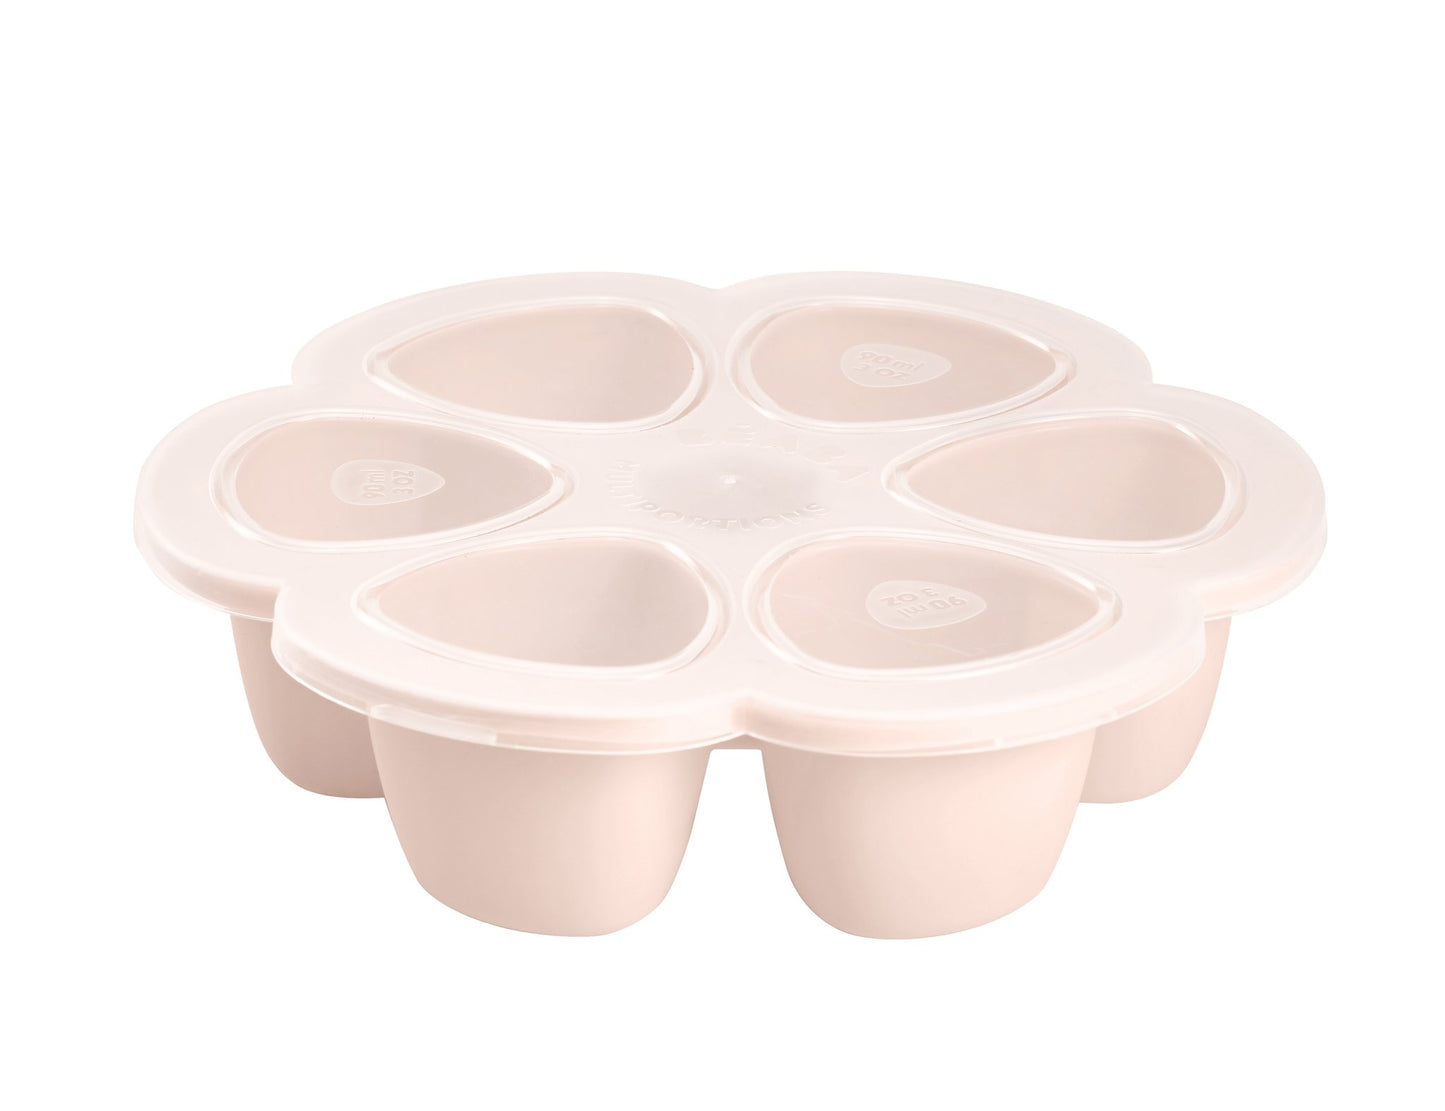 Beaba Silicone Multiportions - 6 x 90 ml